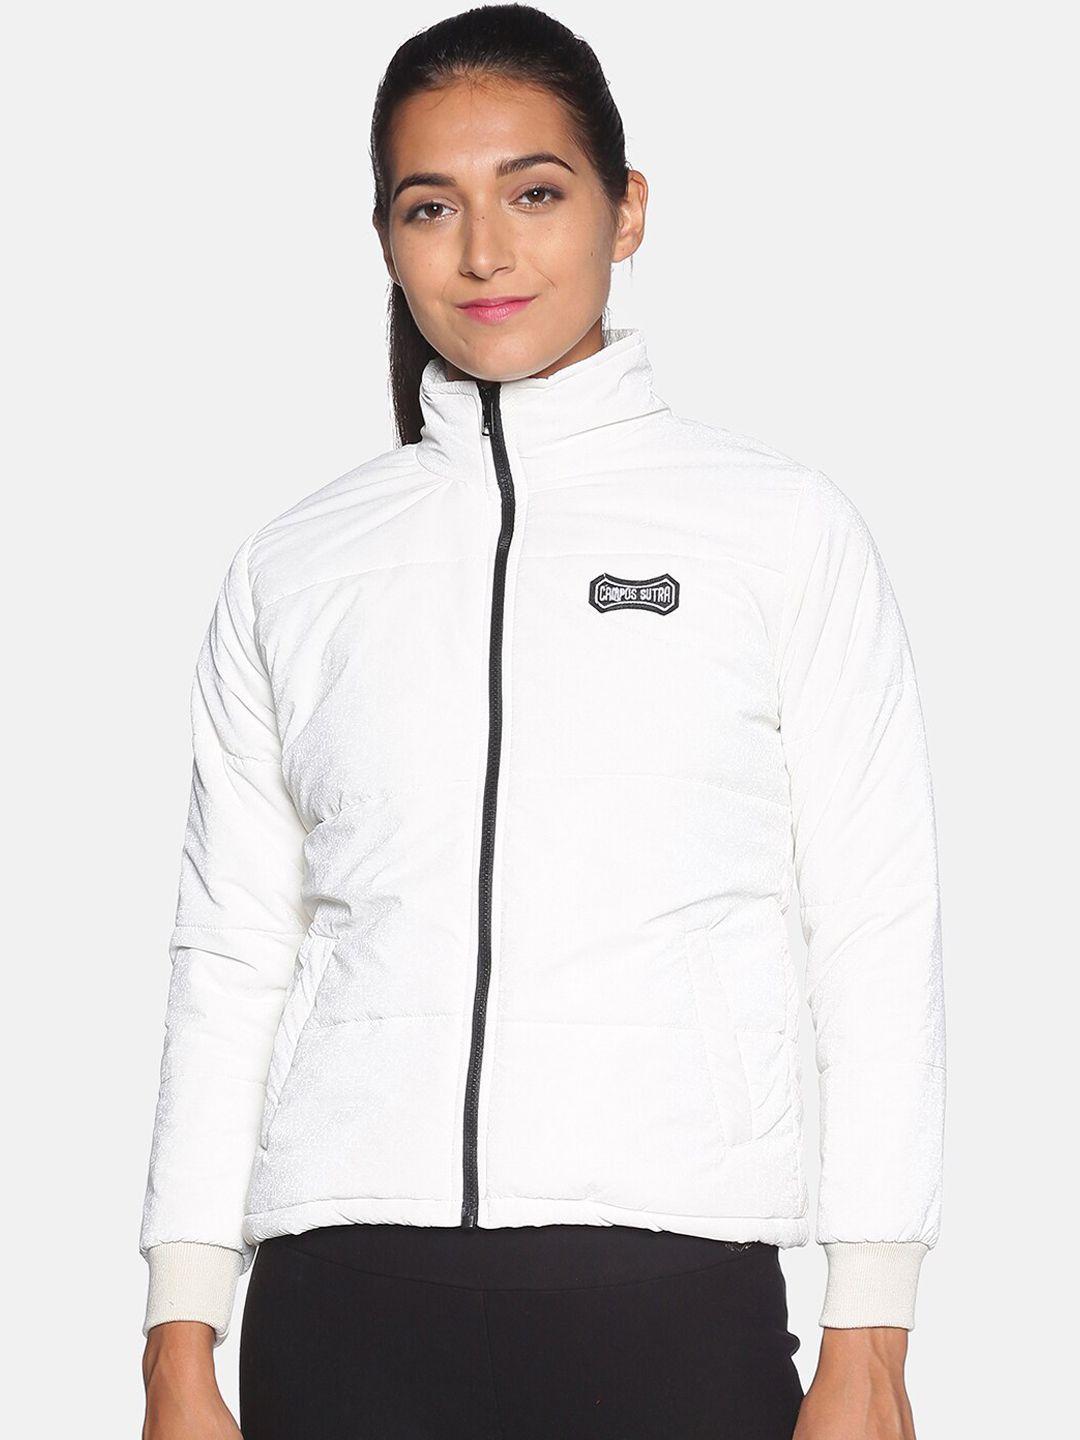 campus sutra women white solid windcheater padded jacket